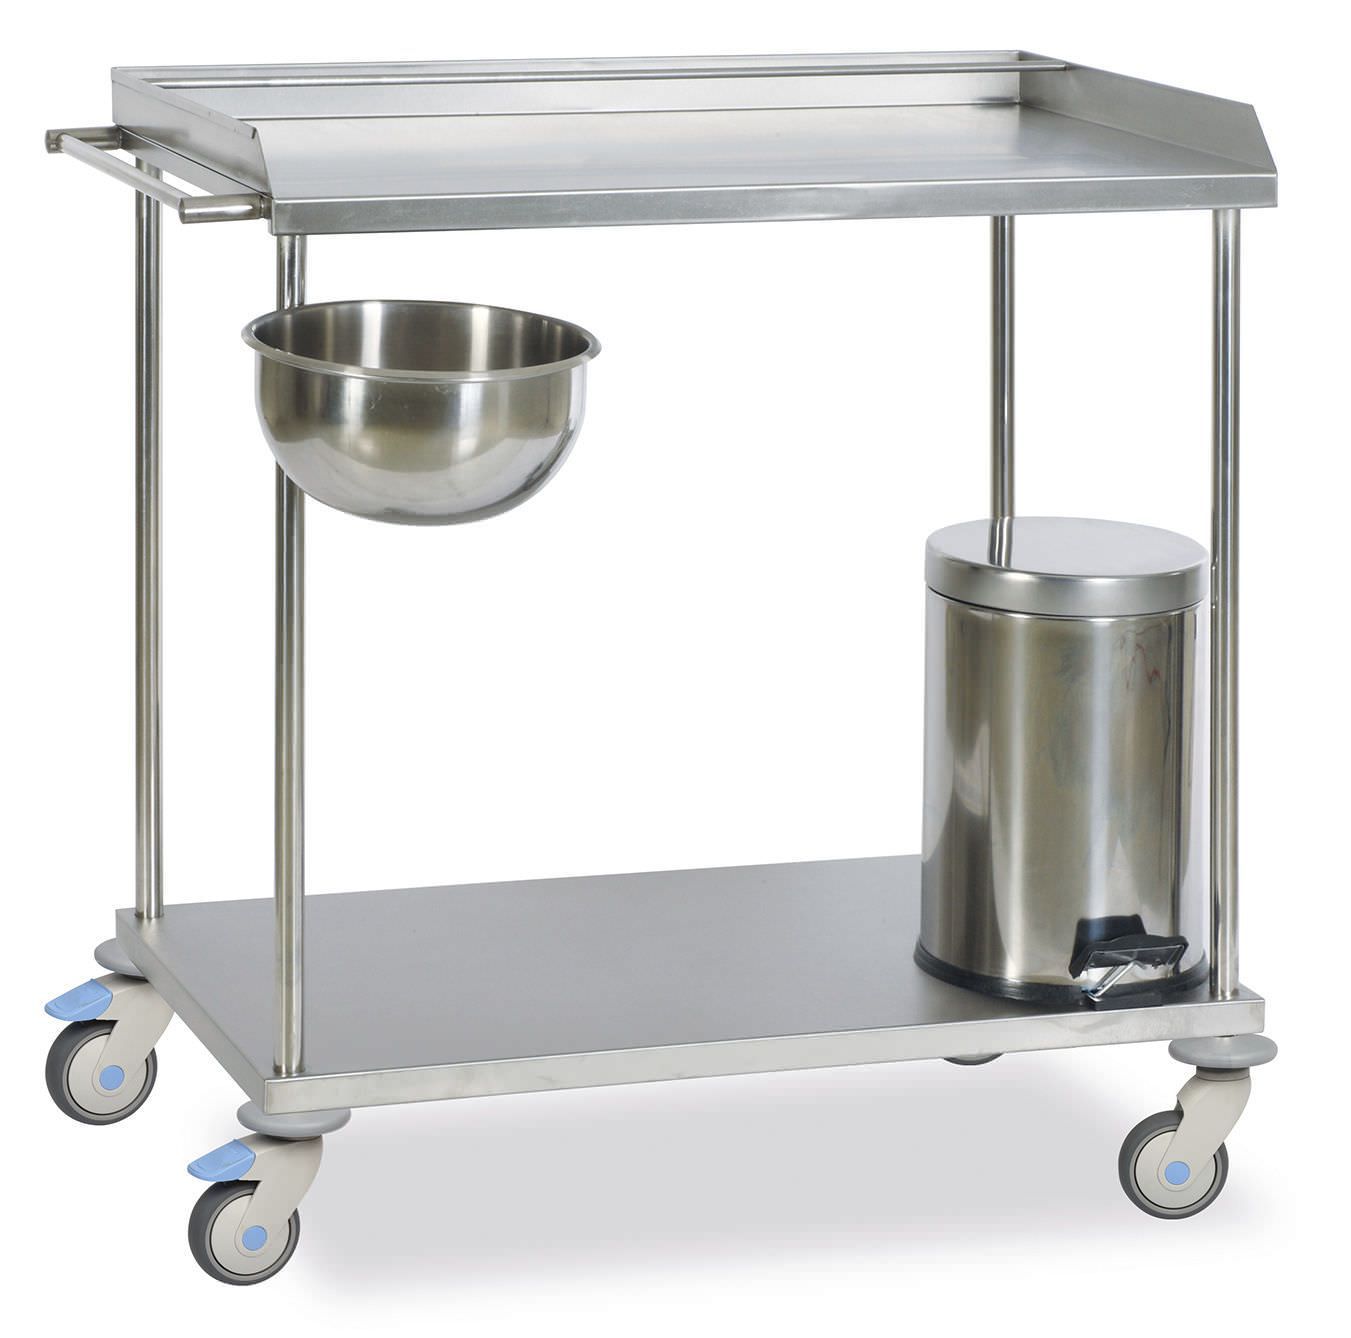 Dressing trolley / stainless steel / 2-tray MAPA 7505 MIXTA STAINLESS STEEL HOSPITAL EQUIPMENTS